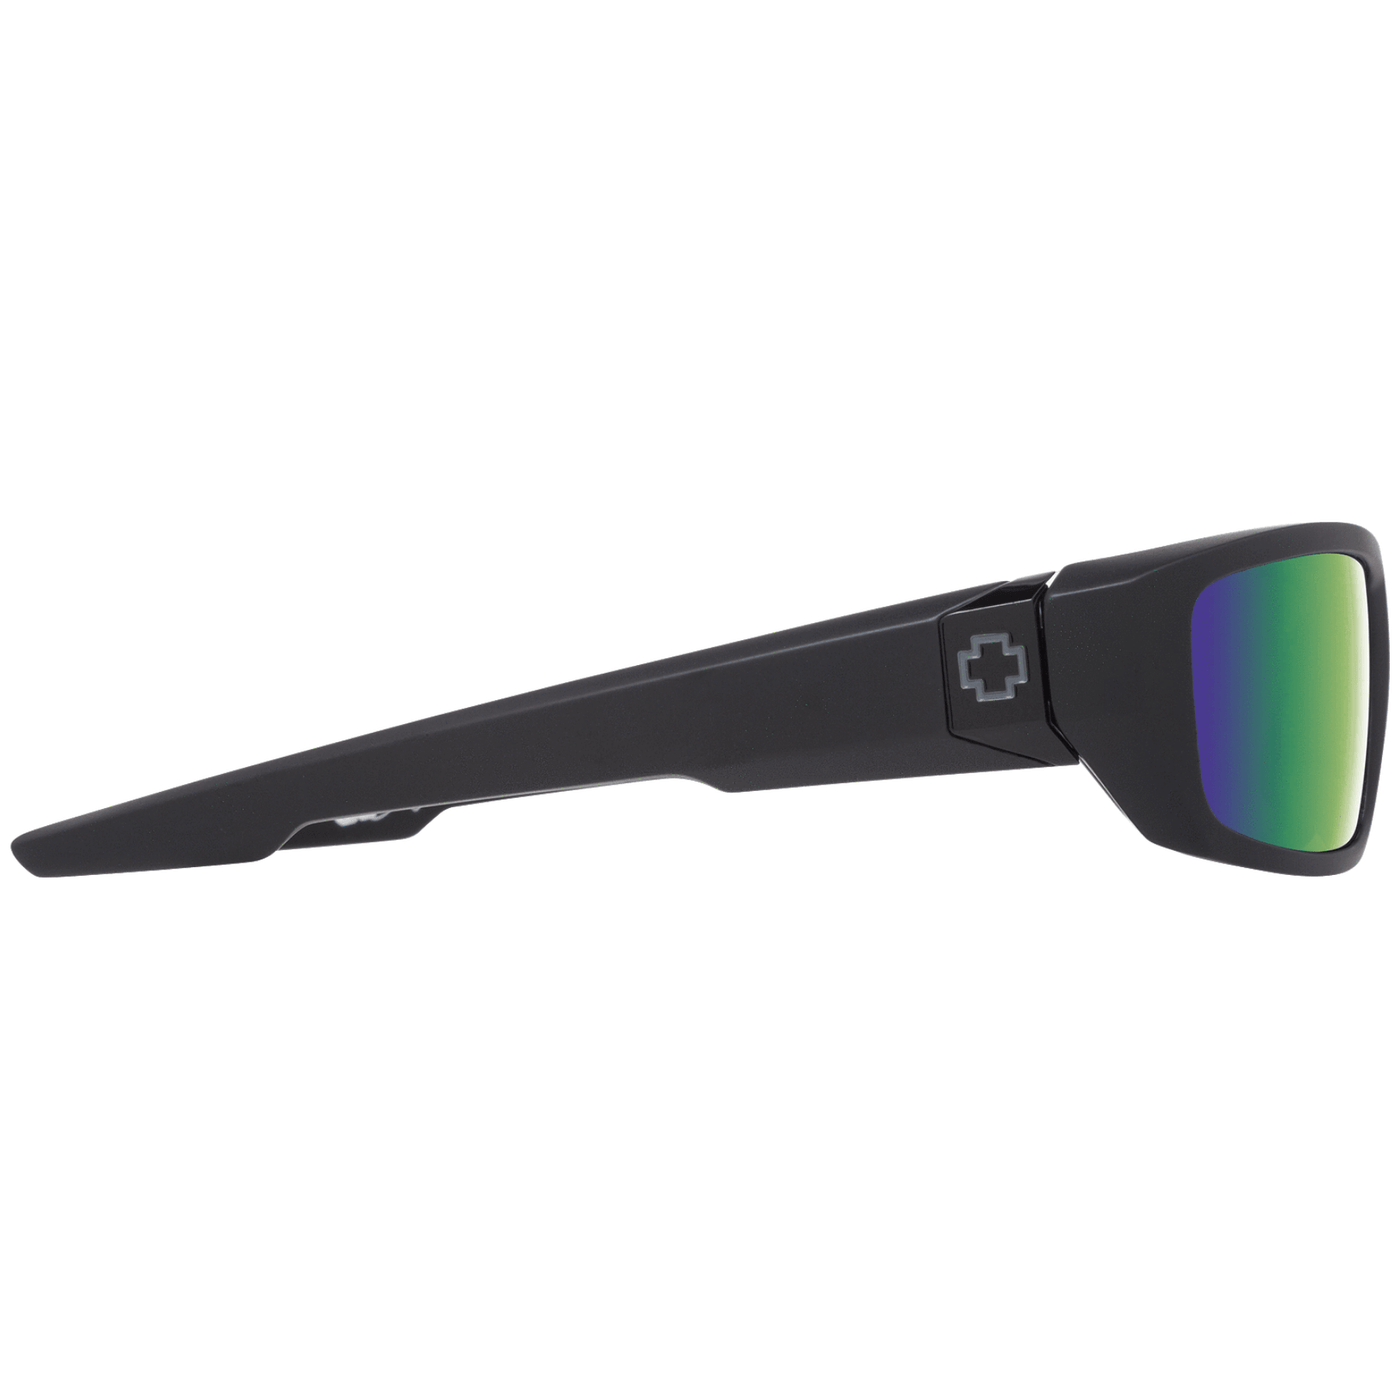 SPY DIRTY MO Polarized Sunglasses - Green/Soft Matte Black 8Lines Shop - Fast Shipping